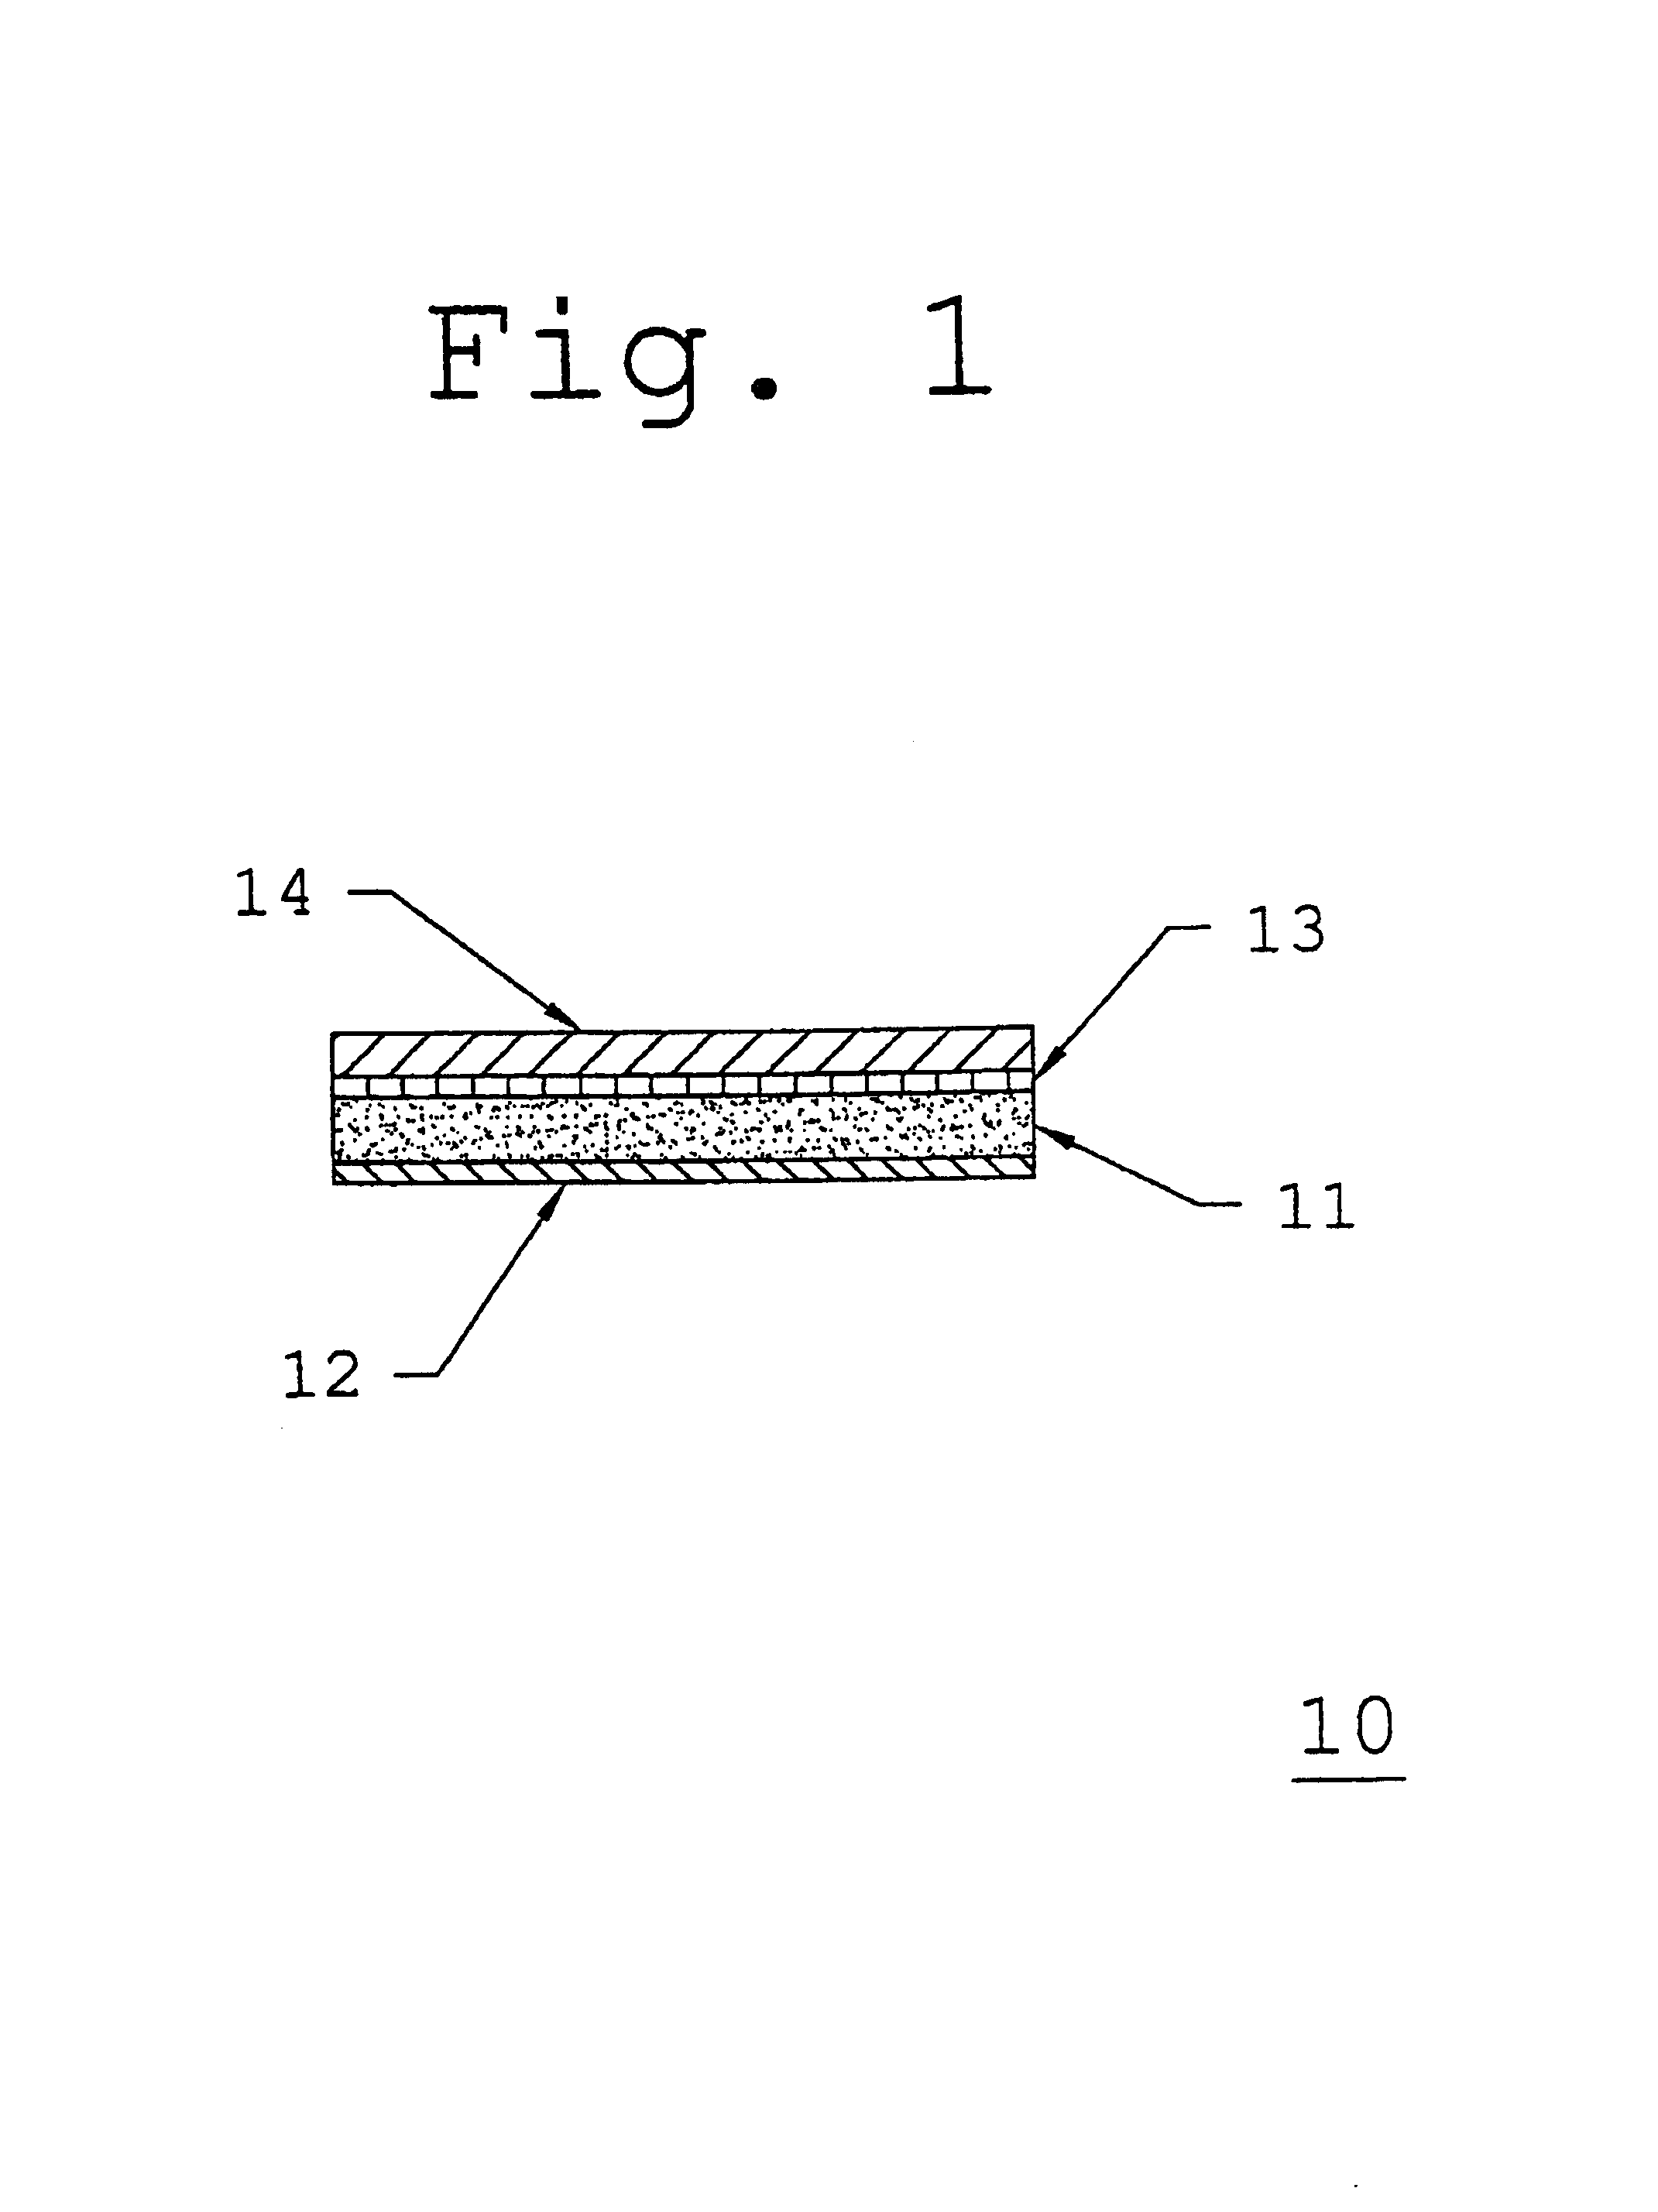 Barrier film lined backing layer composition and method for topical administration of active agents